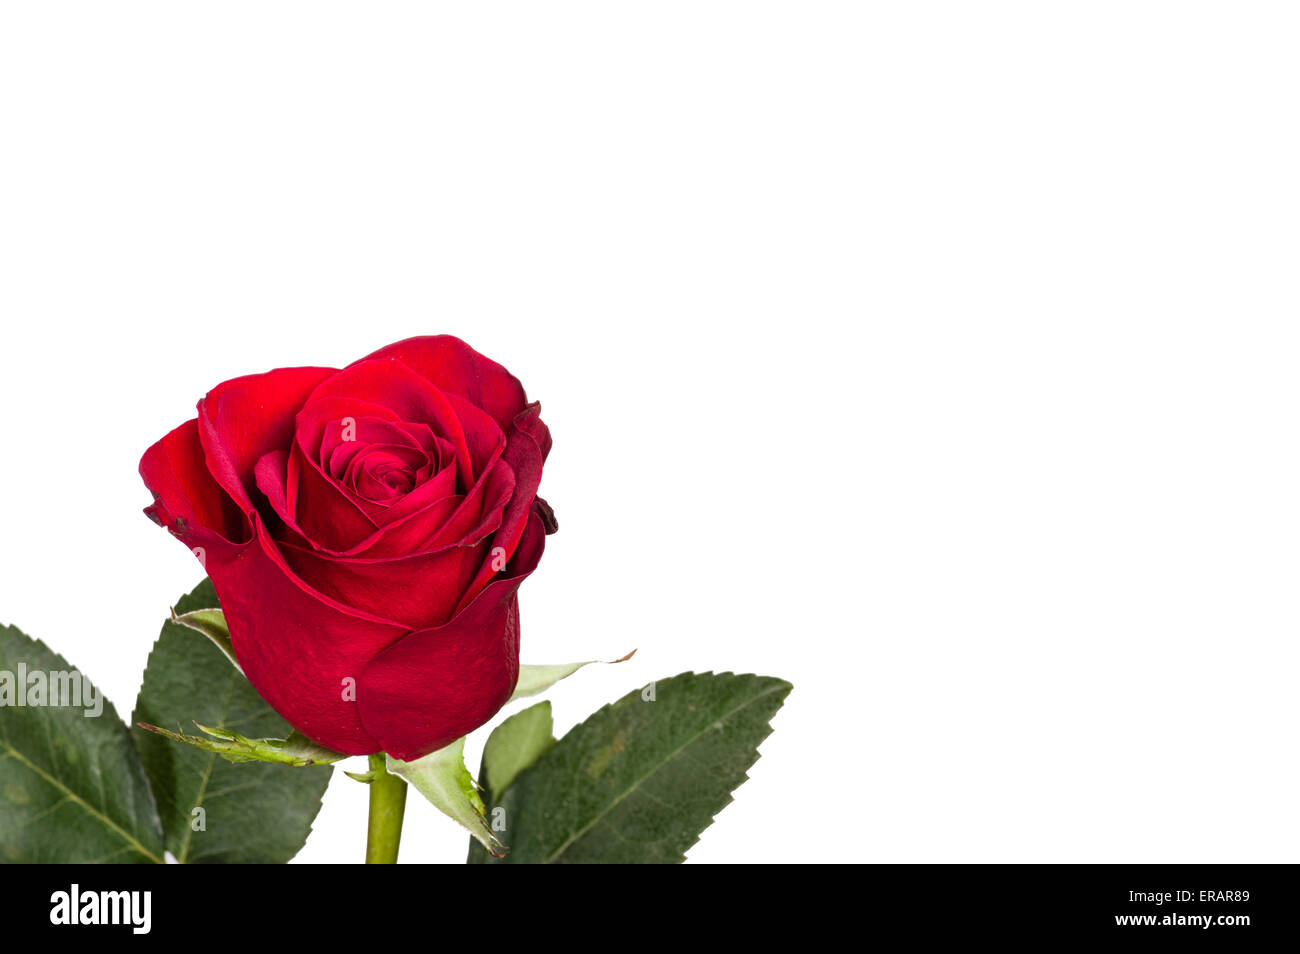 A single bright red rose isolated on white Stock Photo